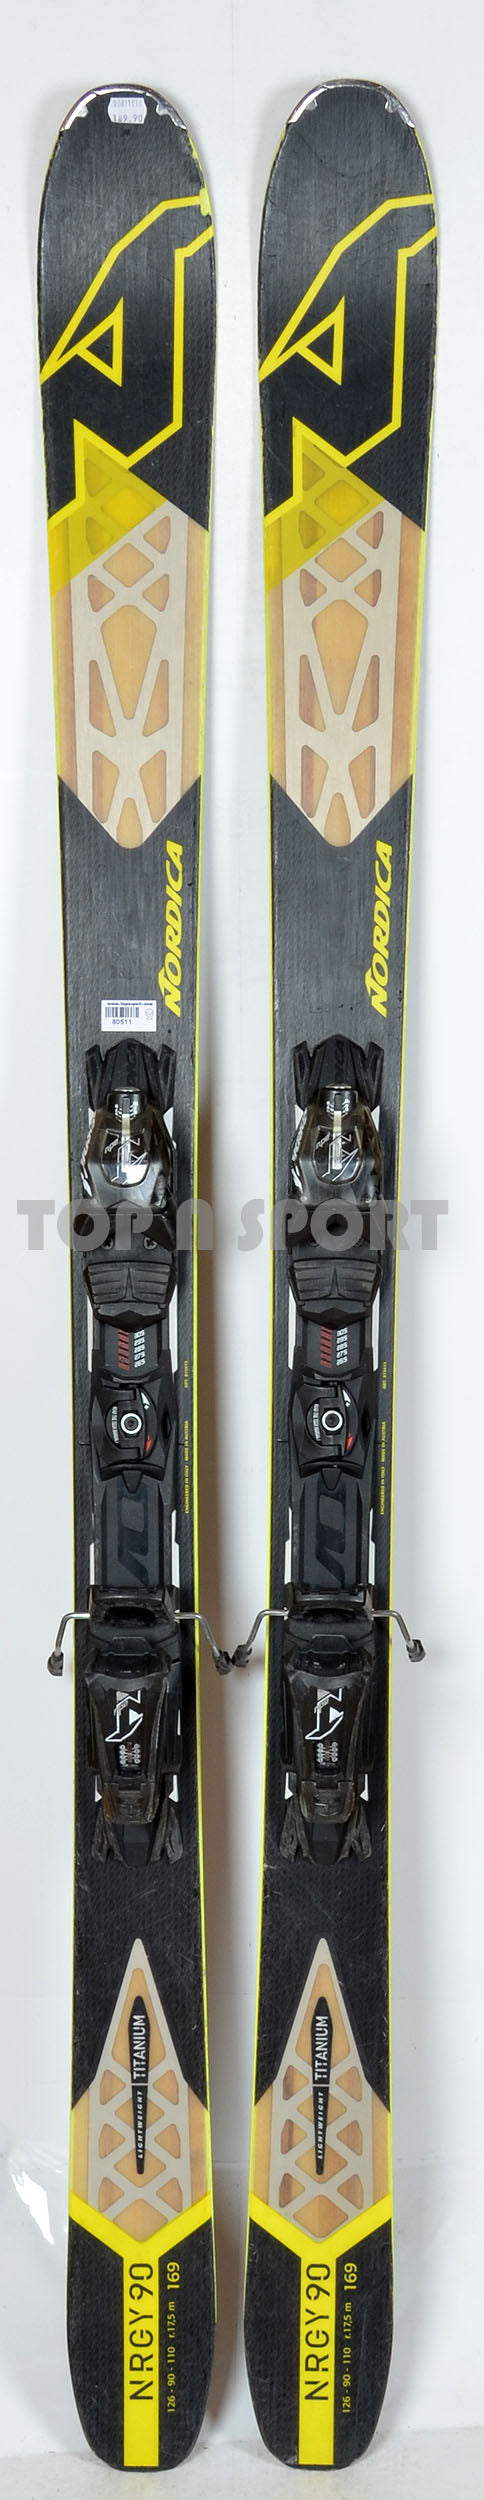 Nordica NRGY 90 - skis d'occasion